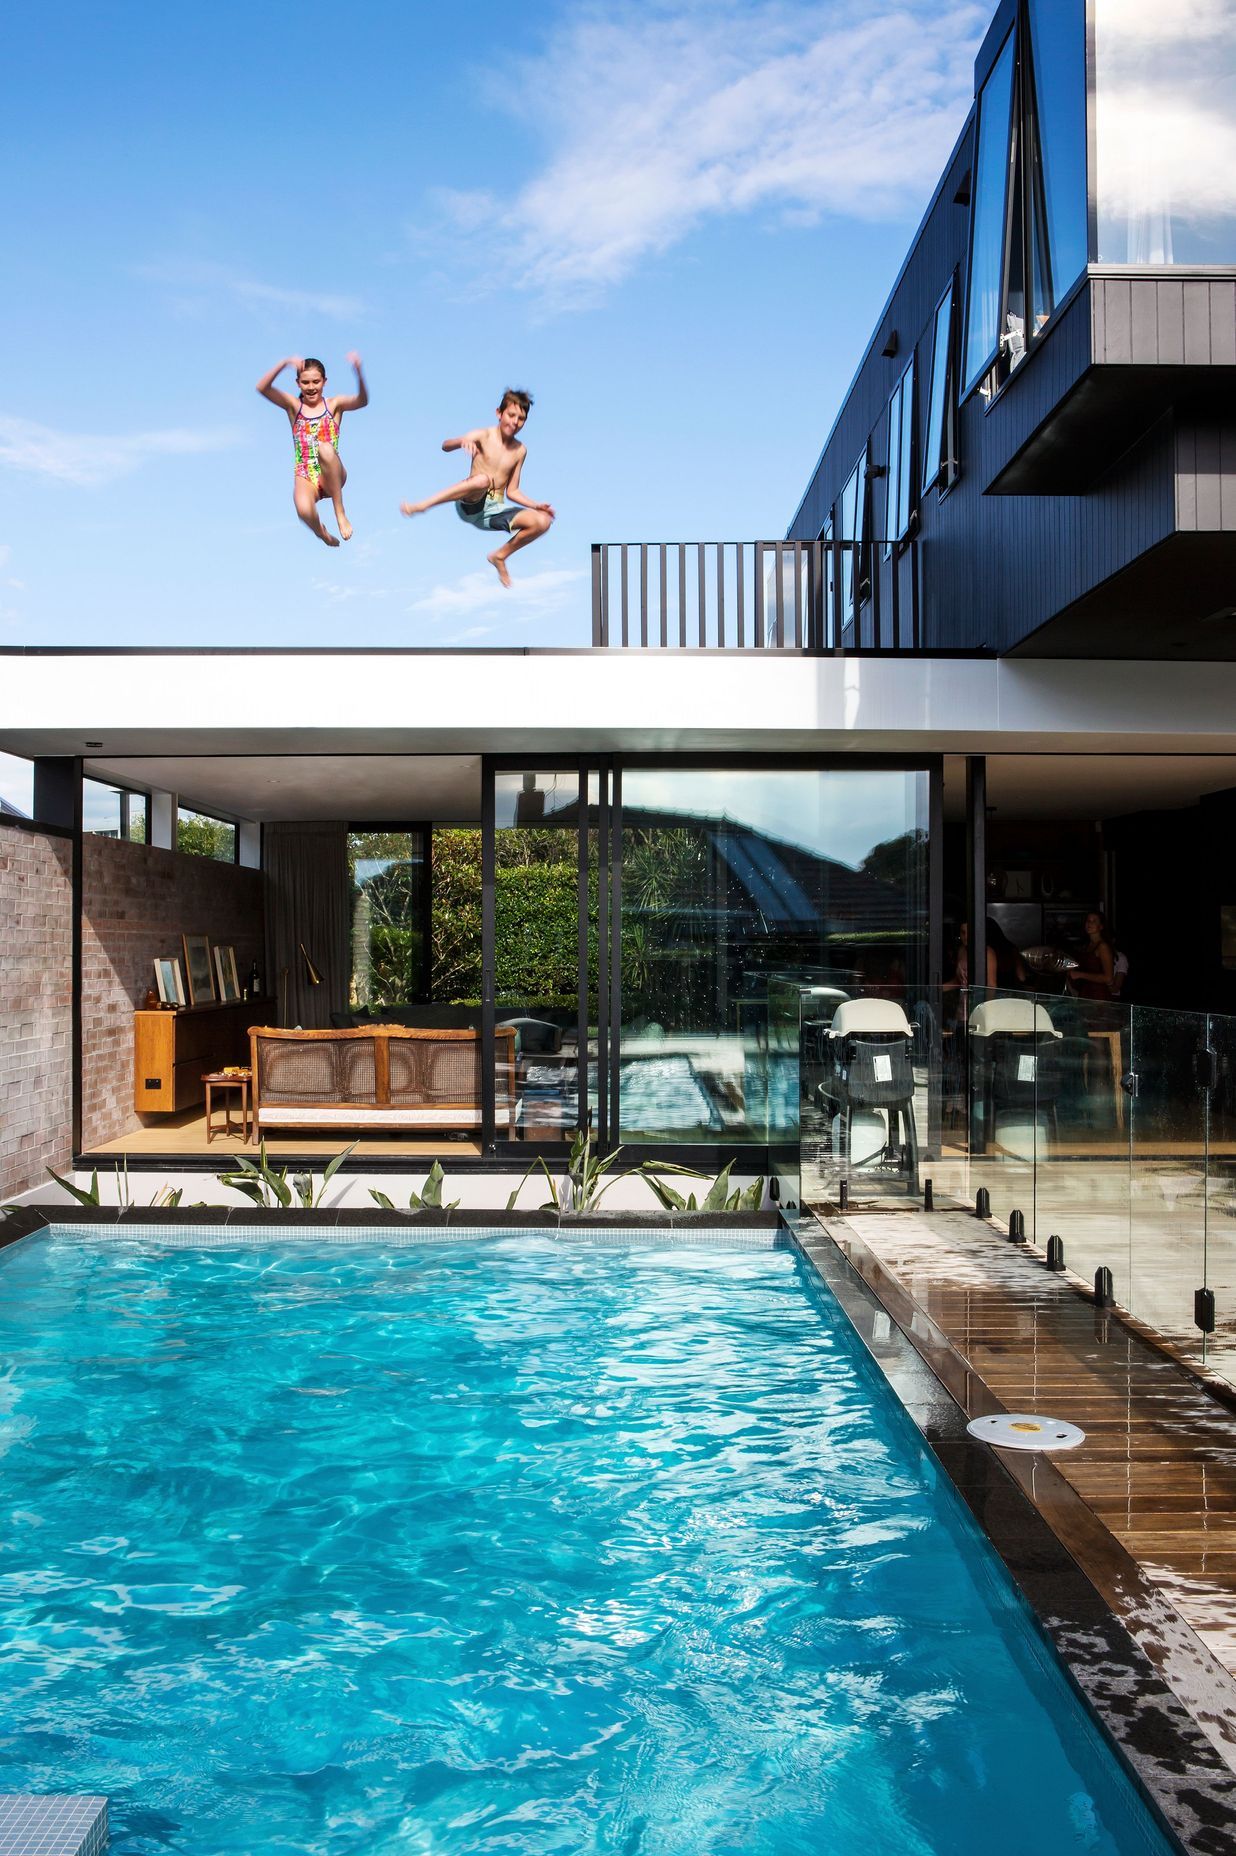 Inspired by the iconic Stahl House* in California, where the kids can jump straight off the roof into the pool.